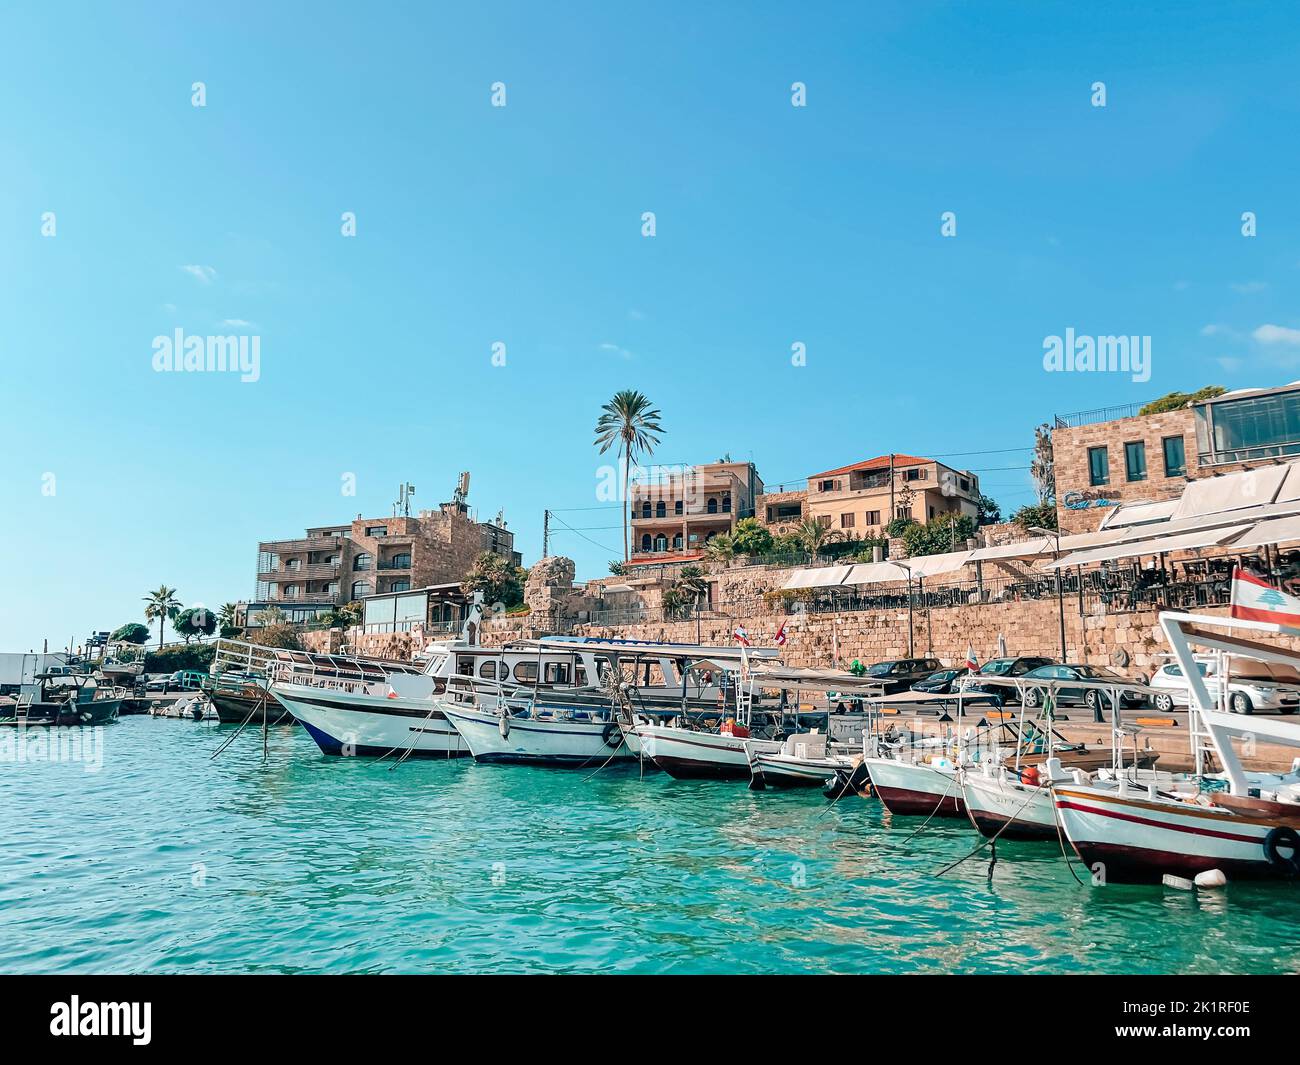 View of Famous and Historic Mediterranean Coastal Town: Byblos, Lebanon - Tourist attractions of Byblos with restaurants and boats in Lebanon - view f Stock Photo